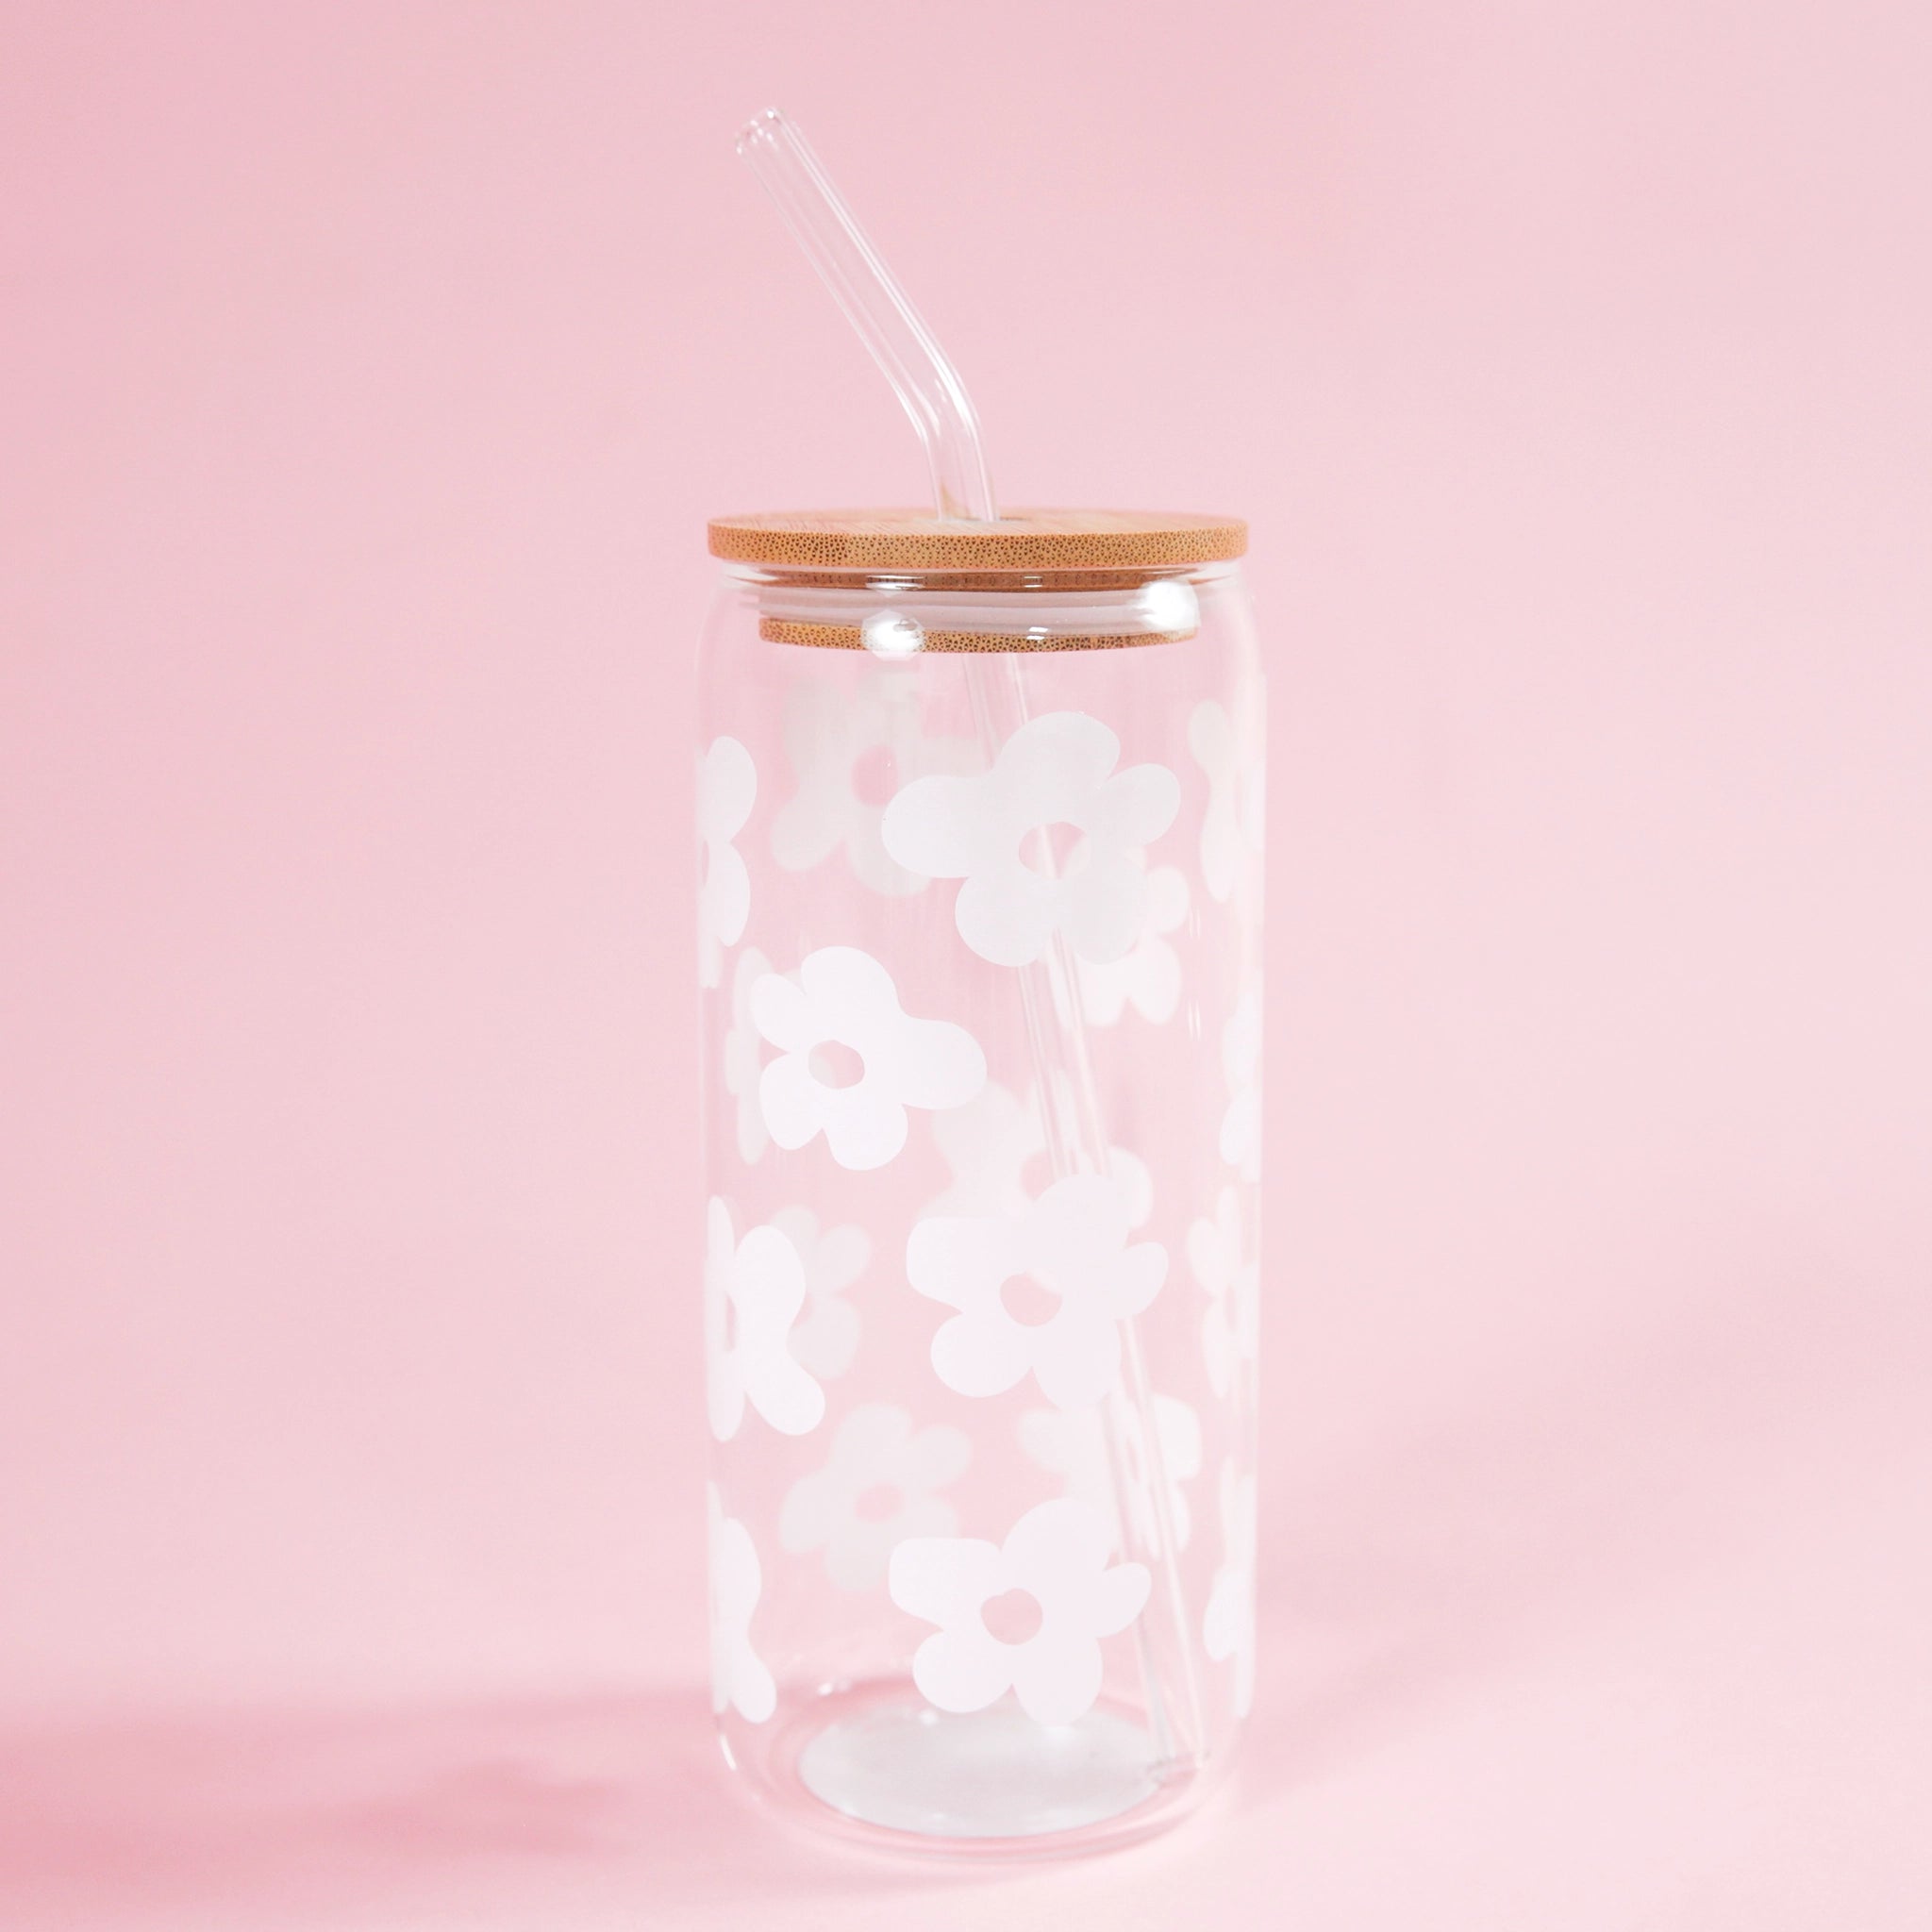 On a light pink background is a clear glass tumbler with a wood lid, a glass straw and white daisy designs all over.